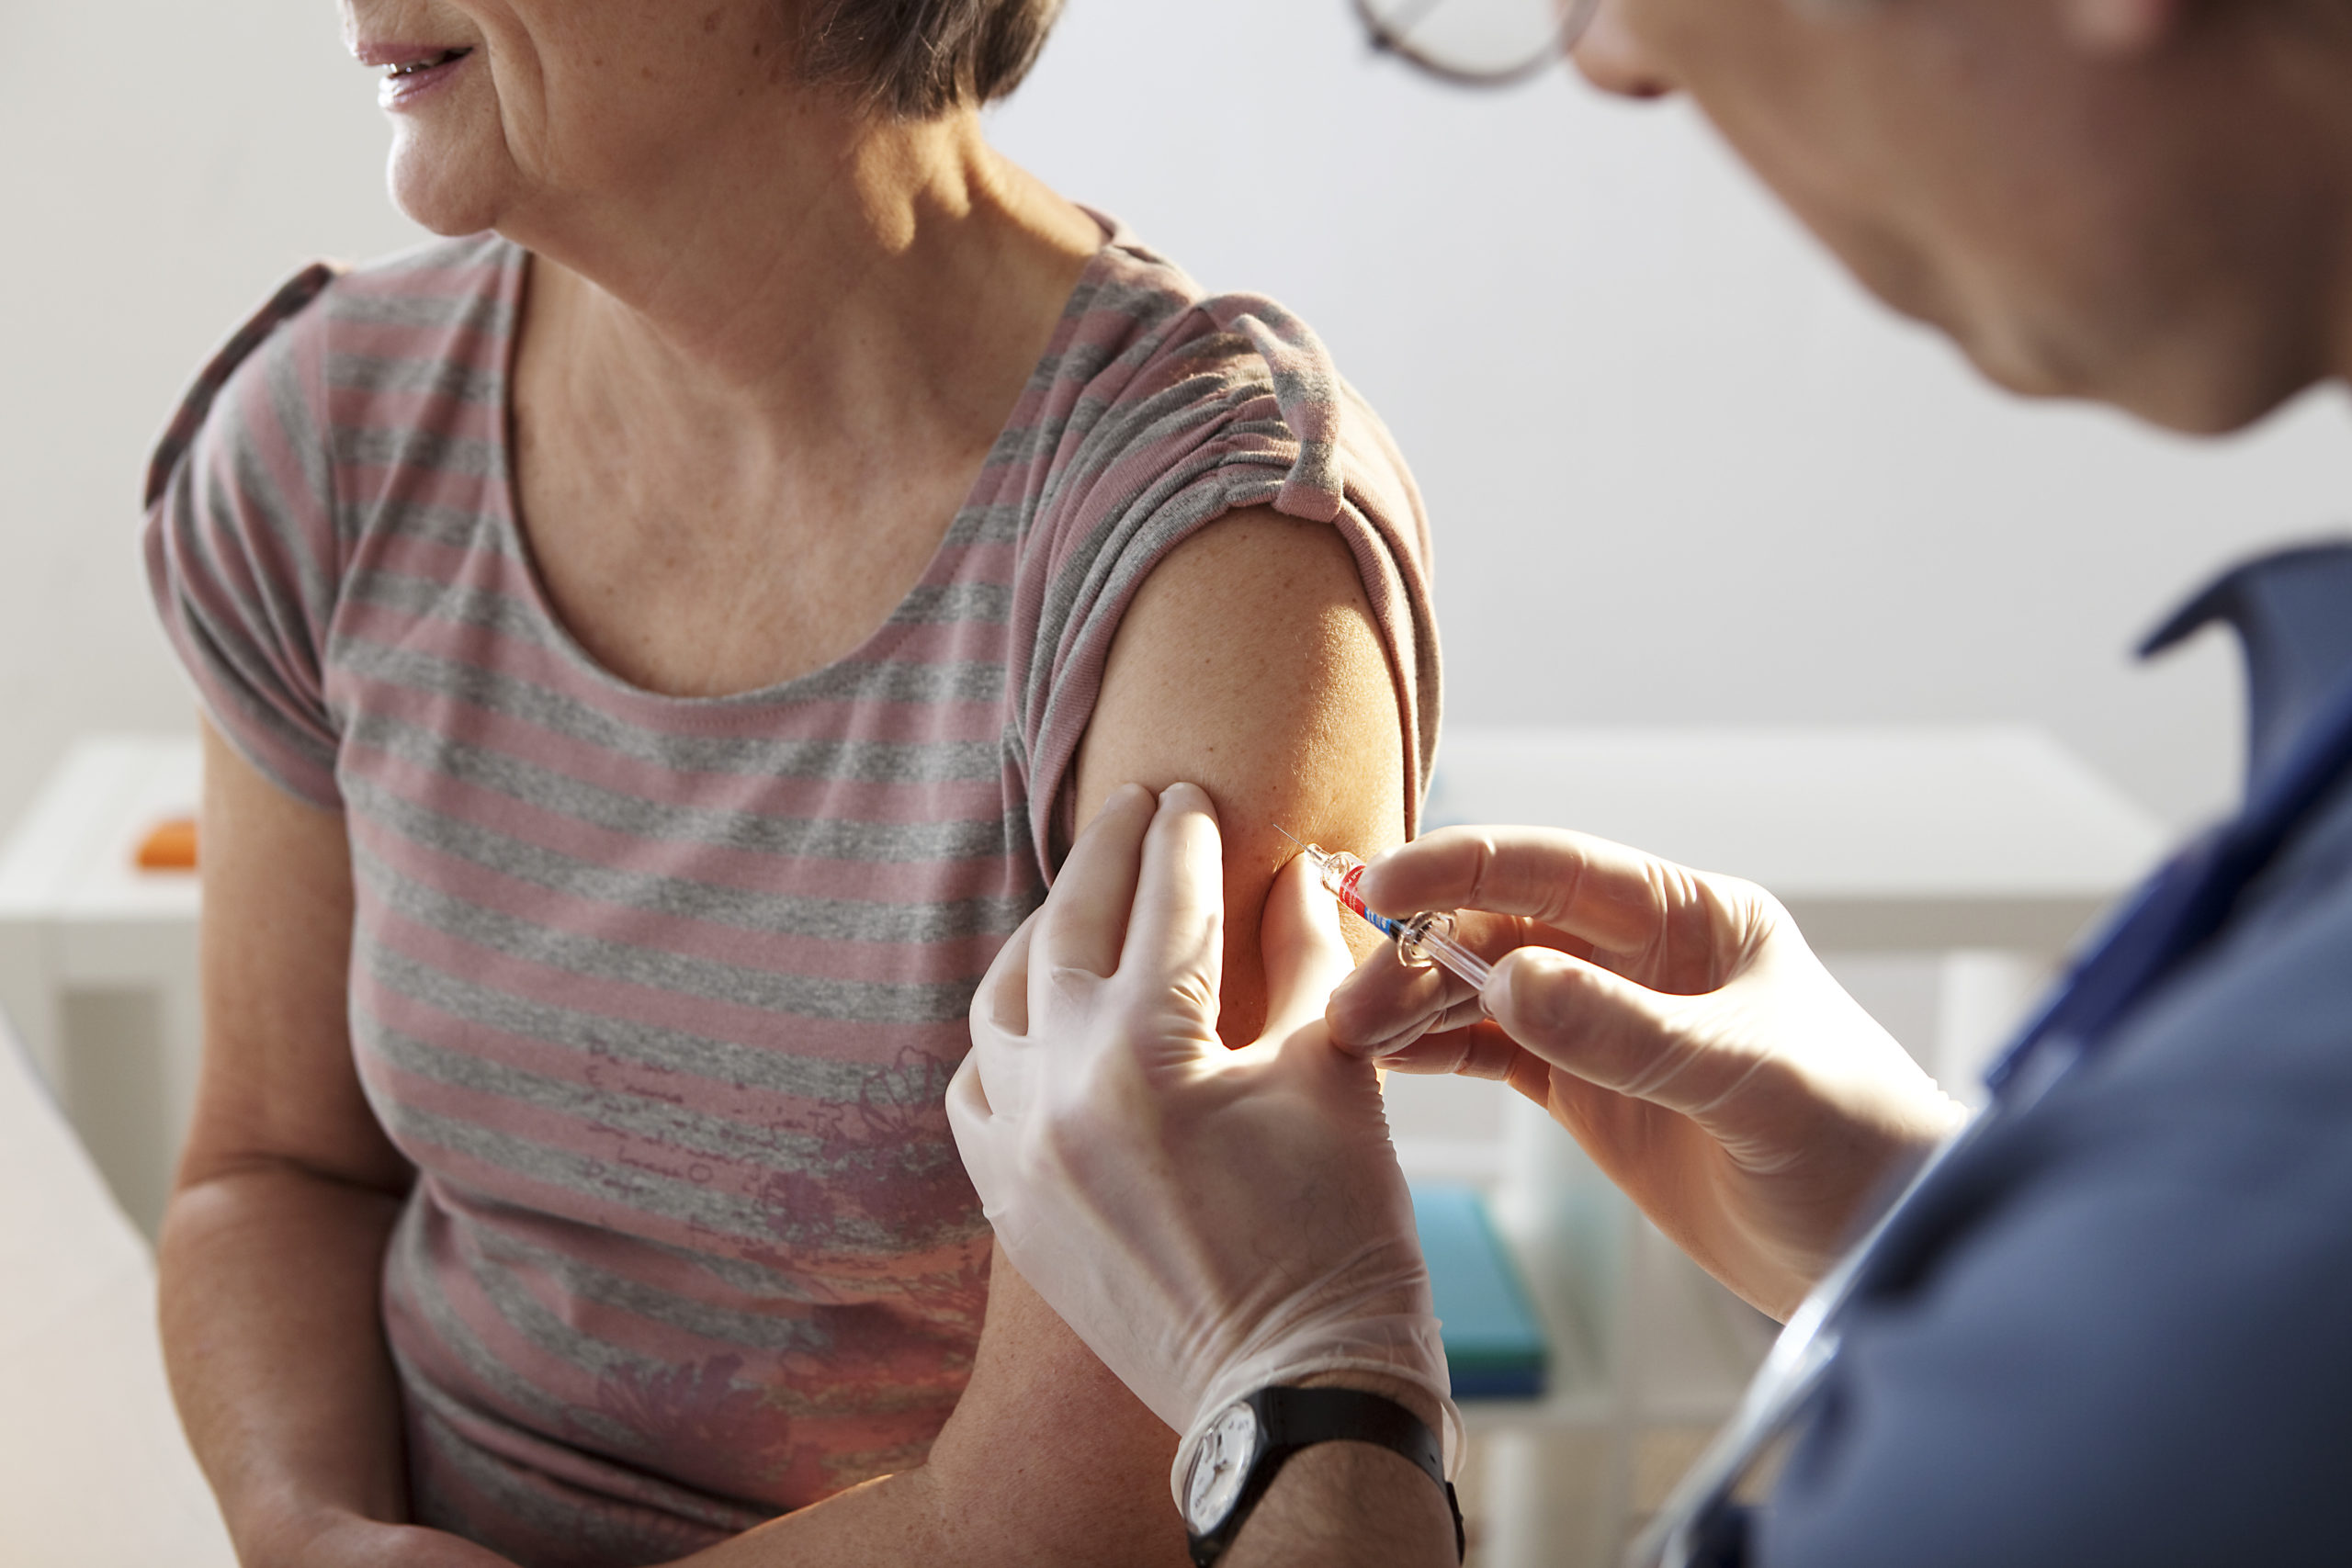 Health official: Get flu shot soon in anticipation of COVID-19 vaccine